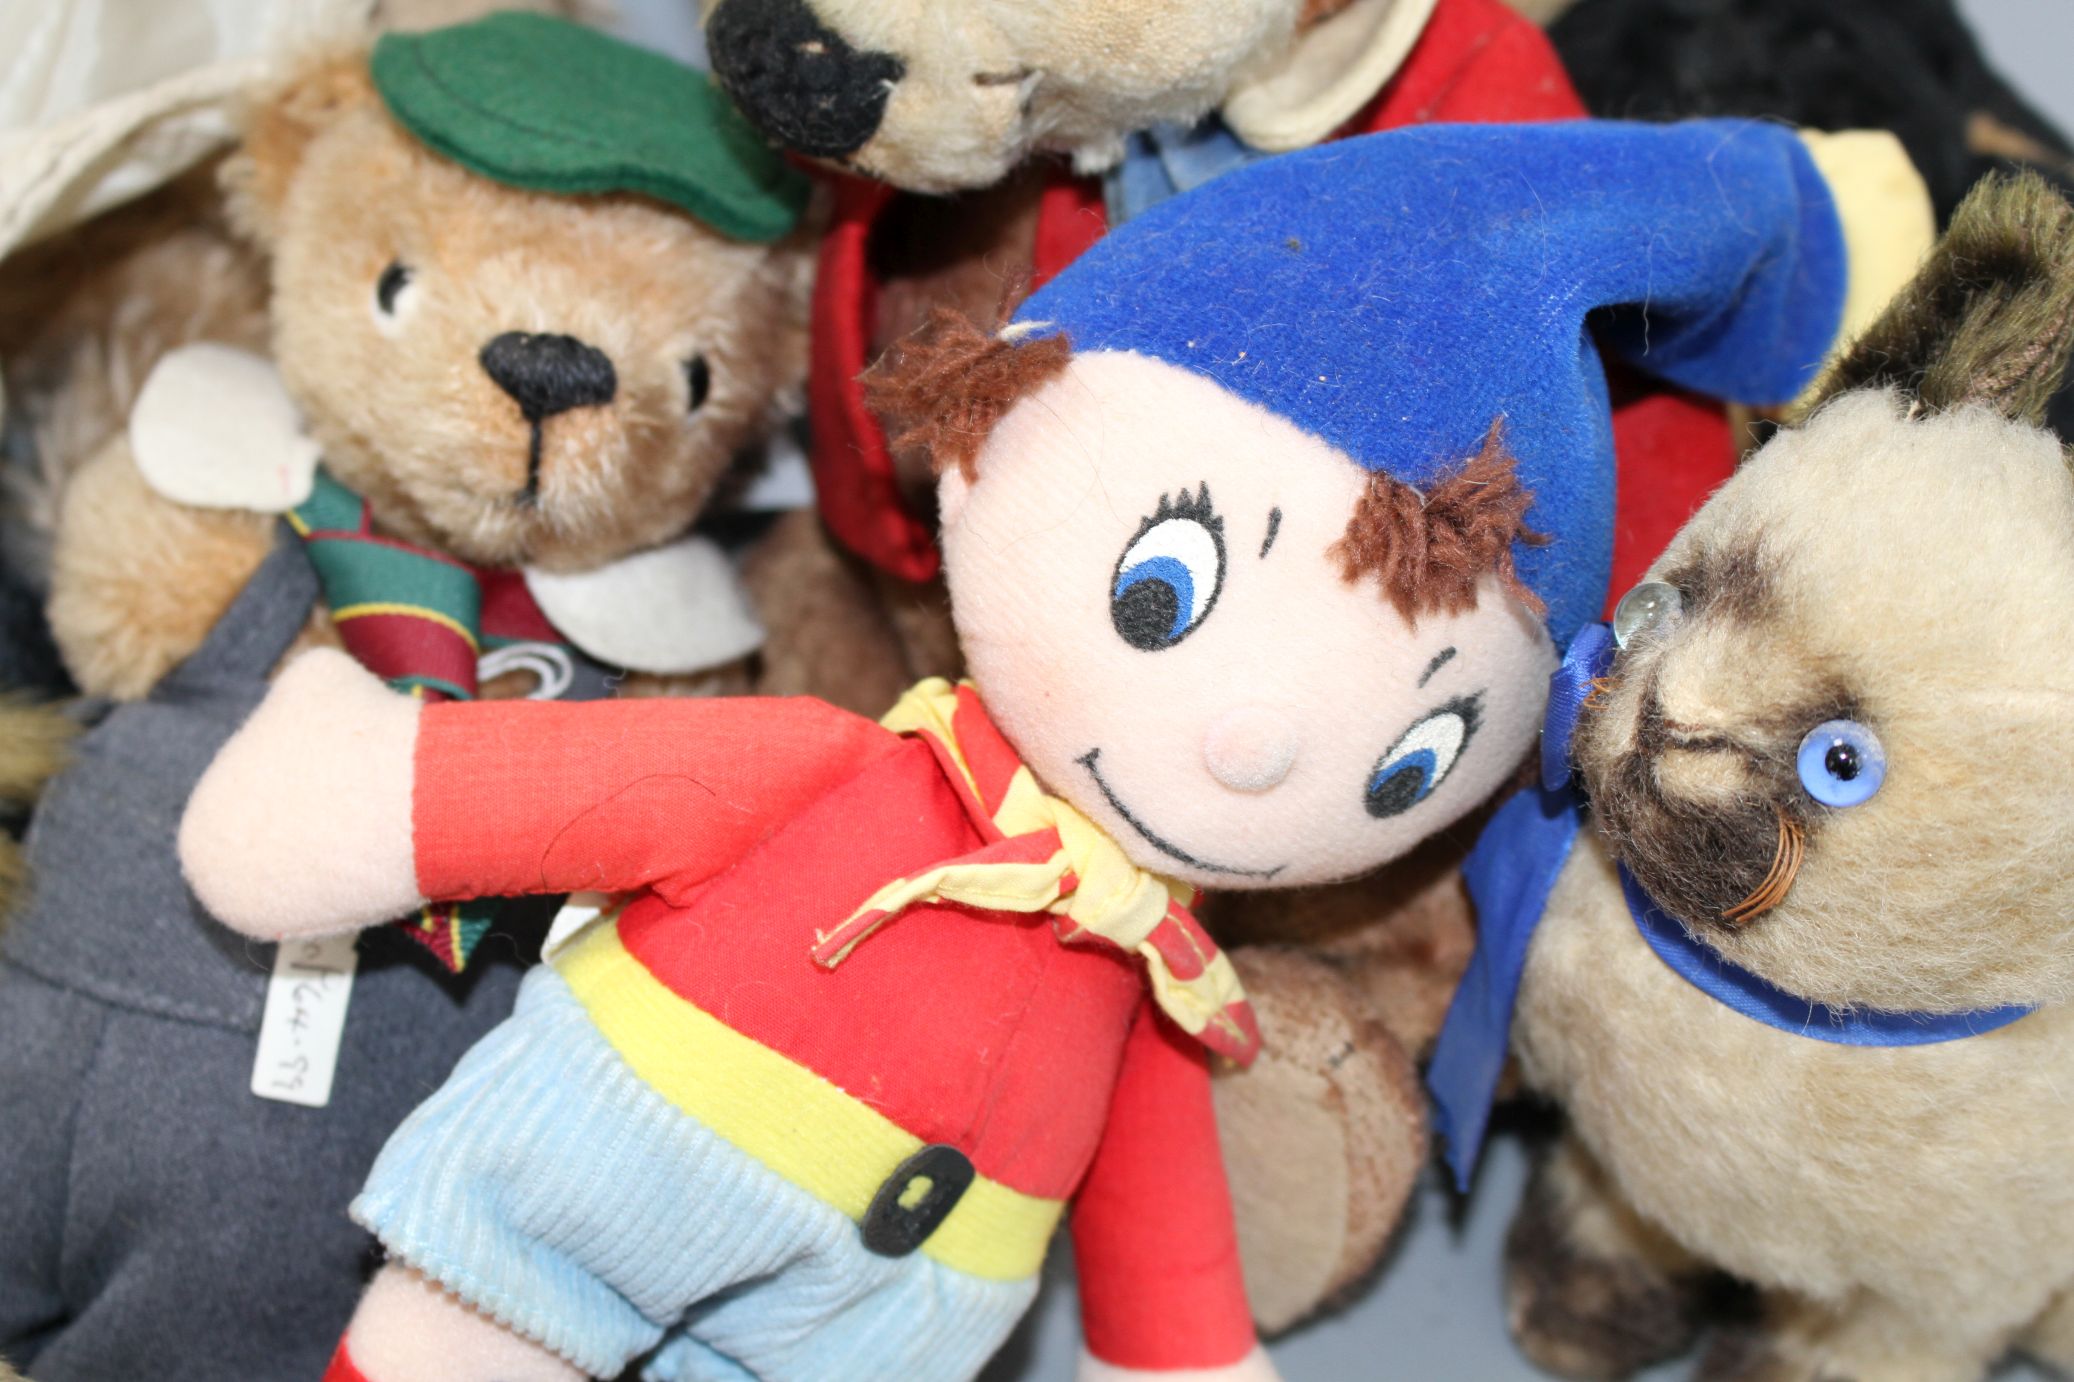 Noddy and Knoll bears, Merrythought Vintage Siamese cat, a Steiff monkey and Carobard character - Image 4 of 7